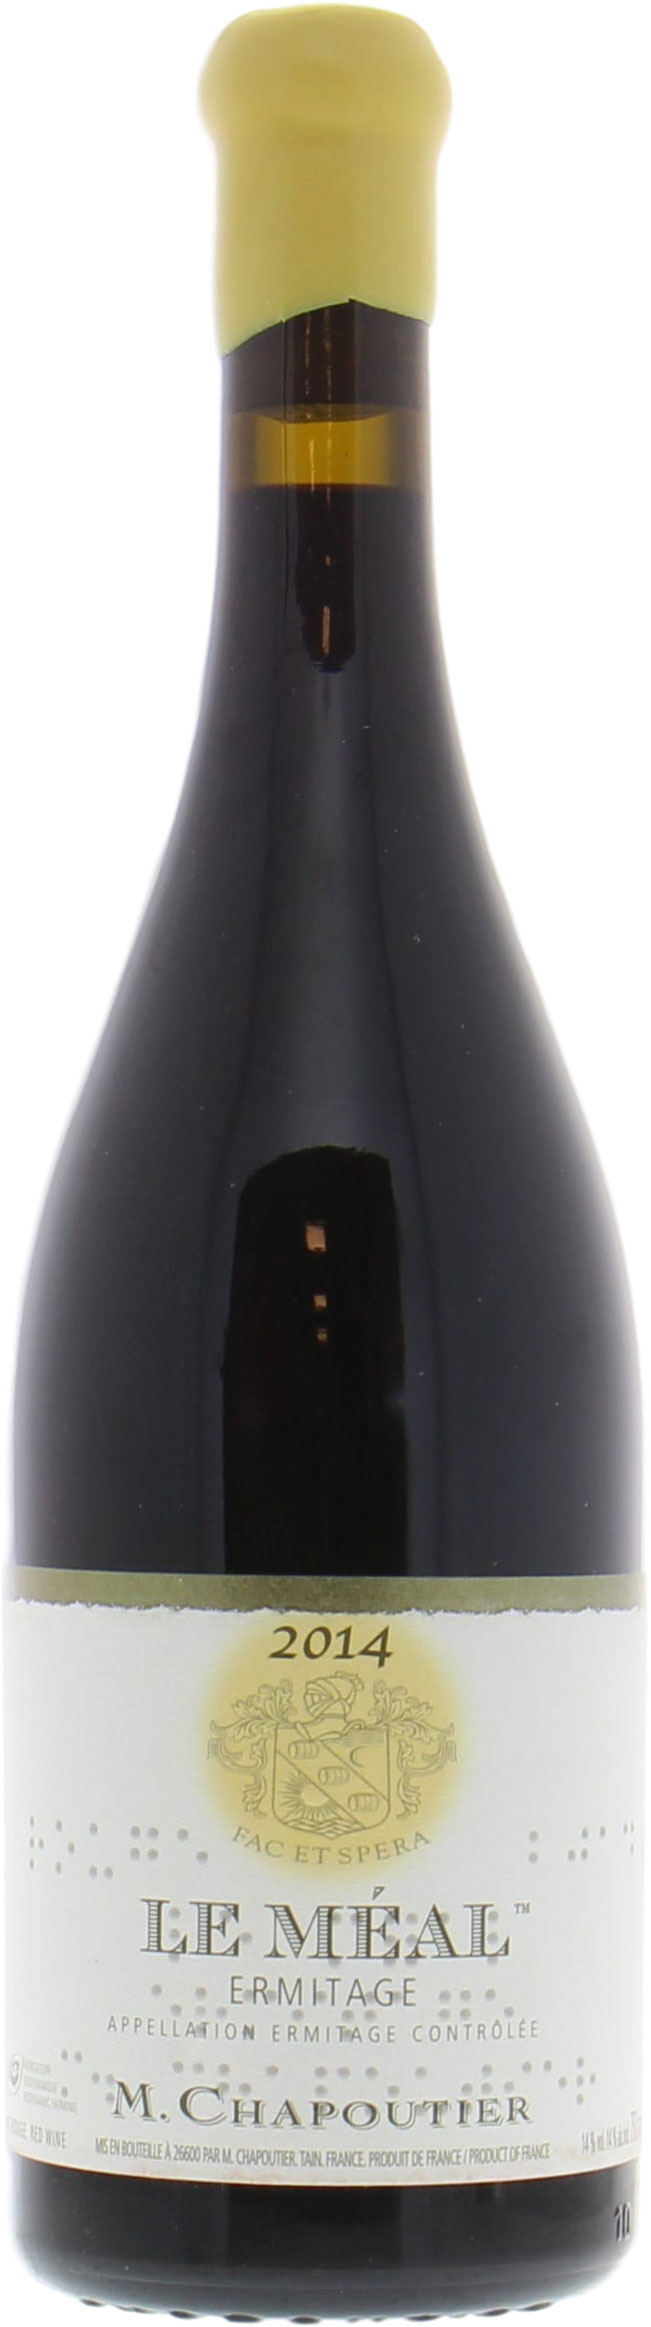 Chapoutier - Ermitage Le Meal Rouge 2014 Perfect